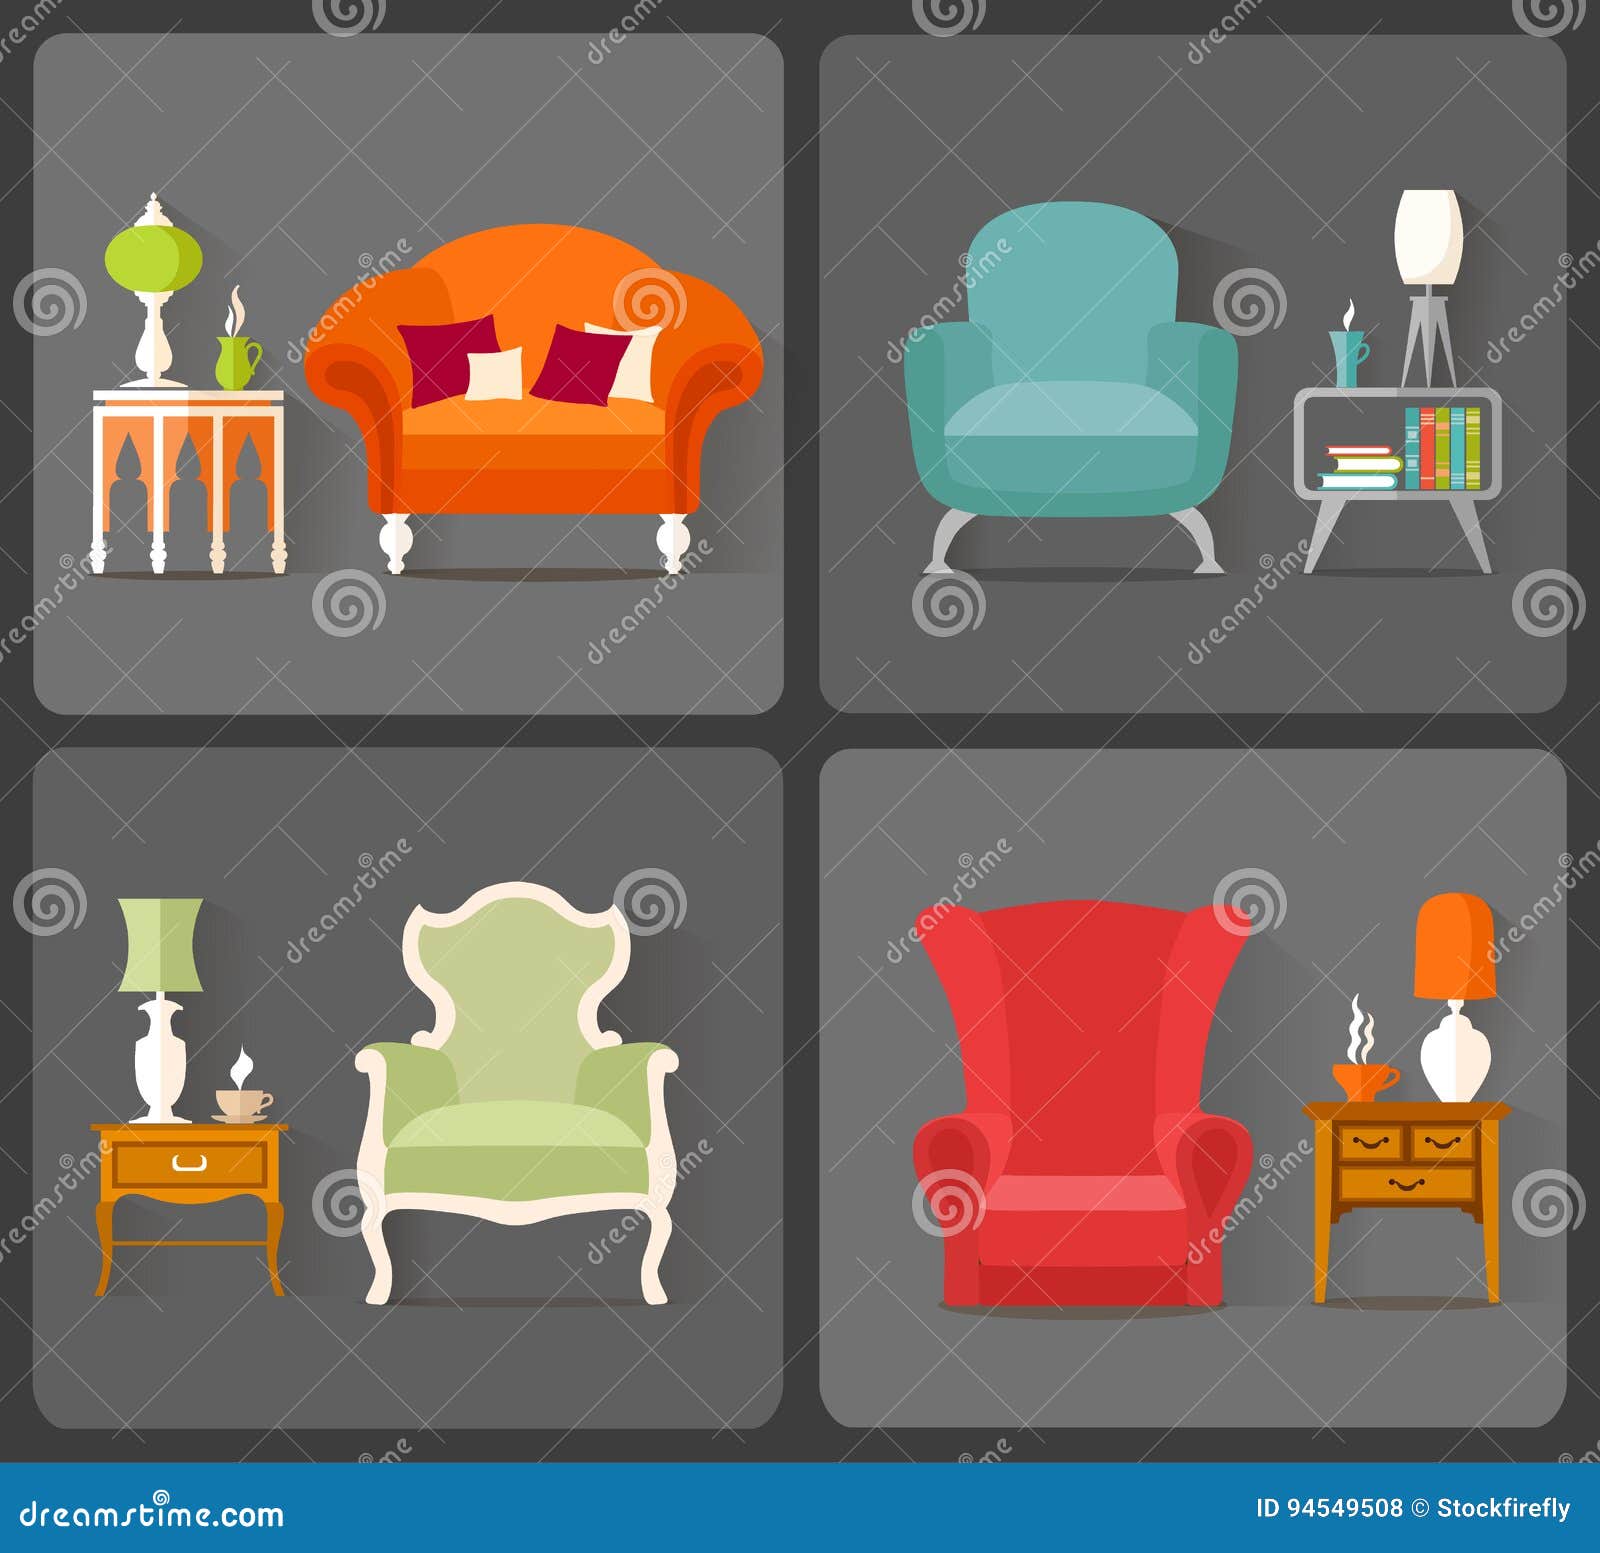 Interior Design Vector Icons With The Image Of Furniture In